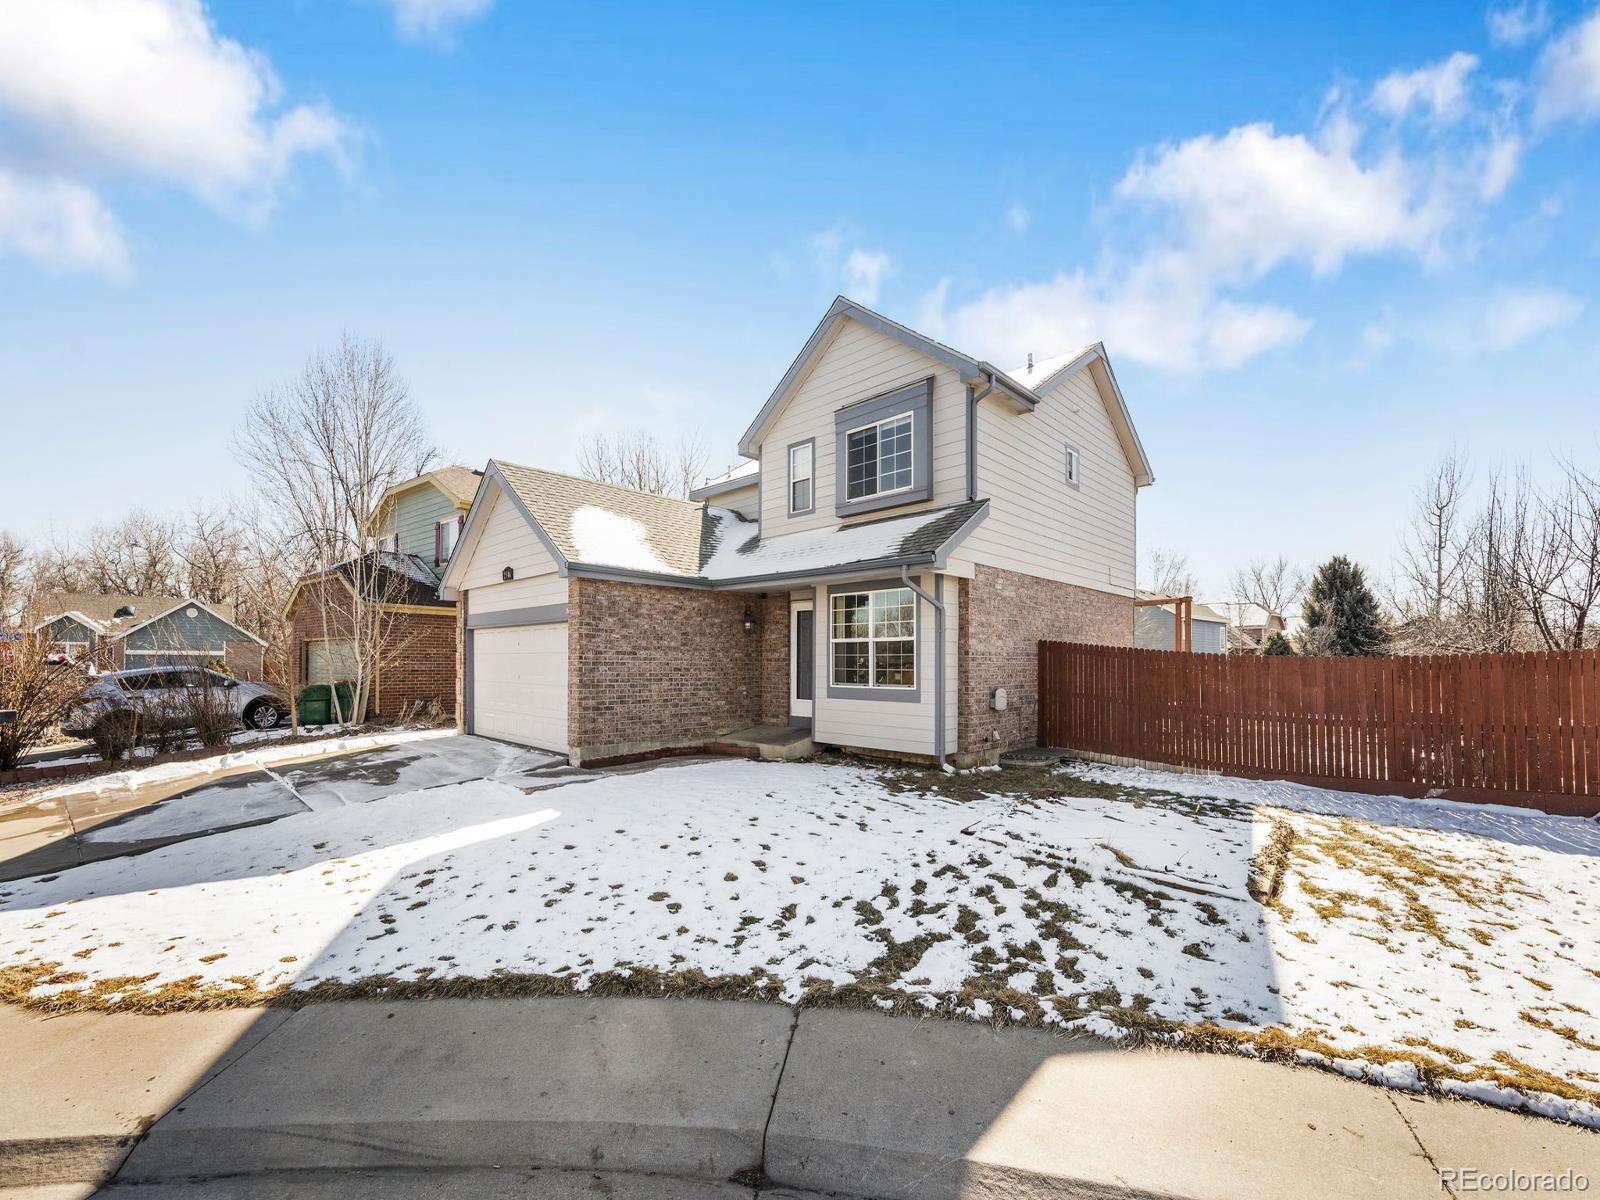 2546 w 132nd way, Broomfield sold home. Closed on 2024-04-09 for $535,000.